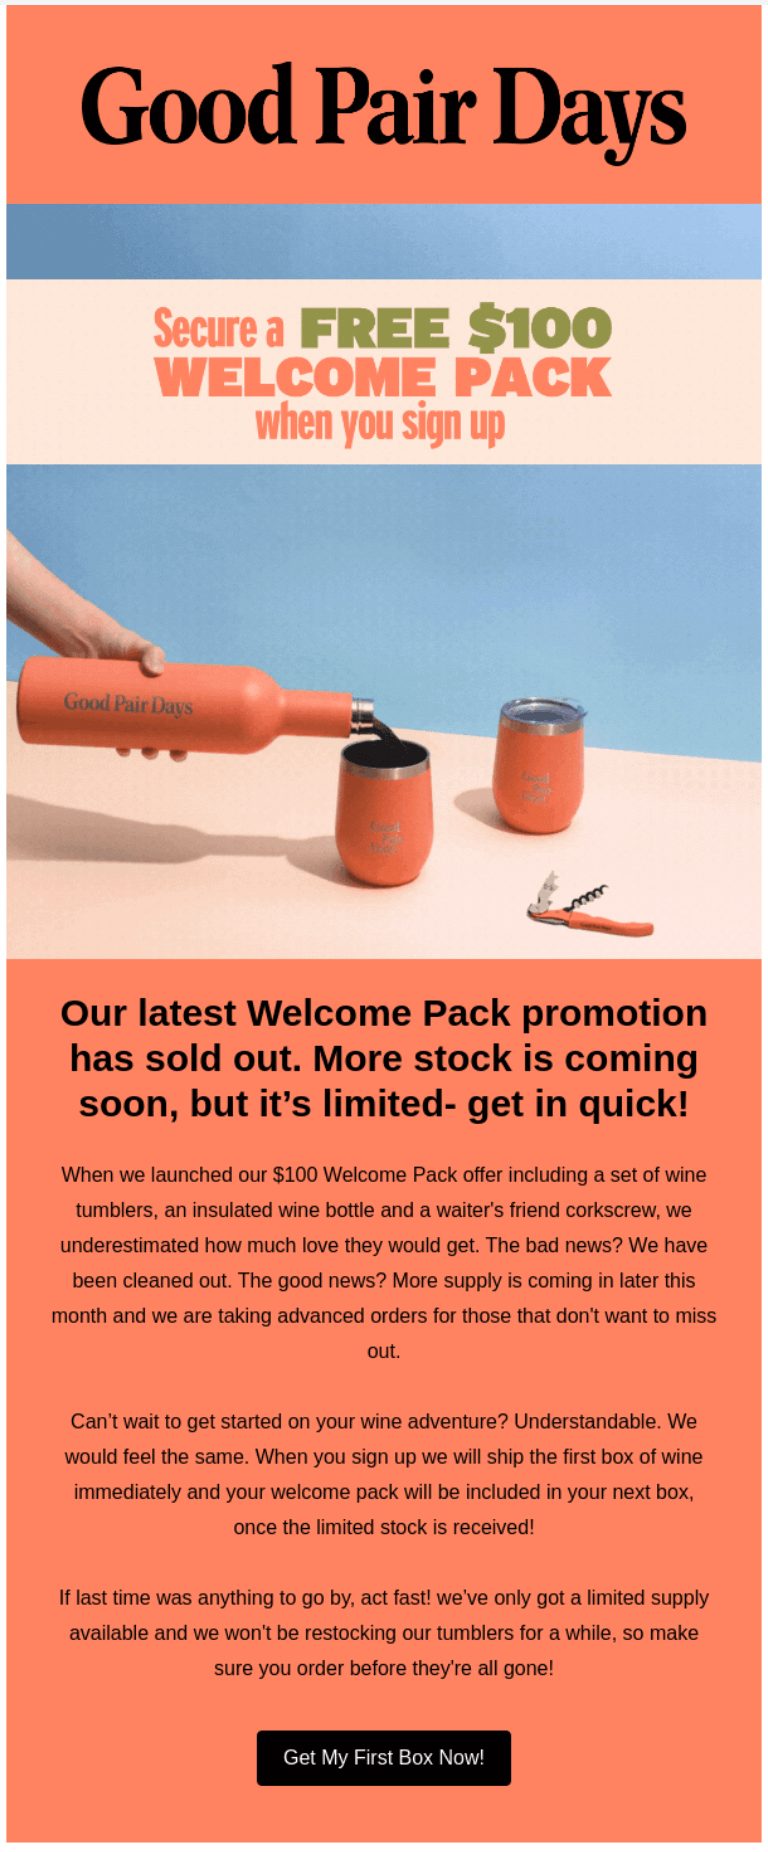 Good Pair Days email promotion